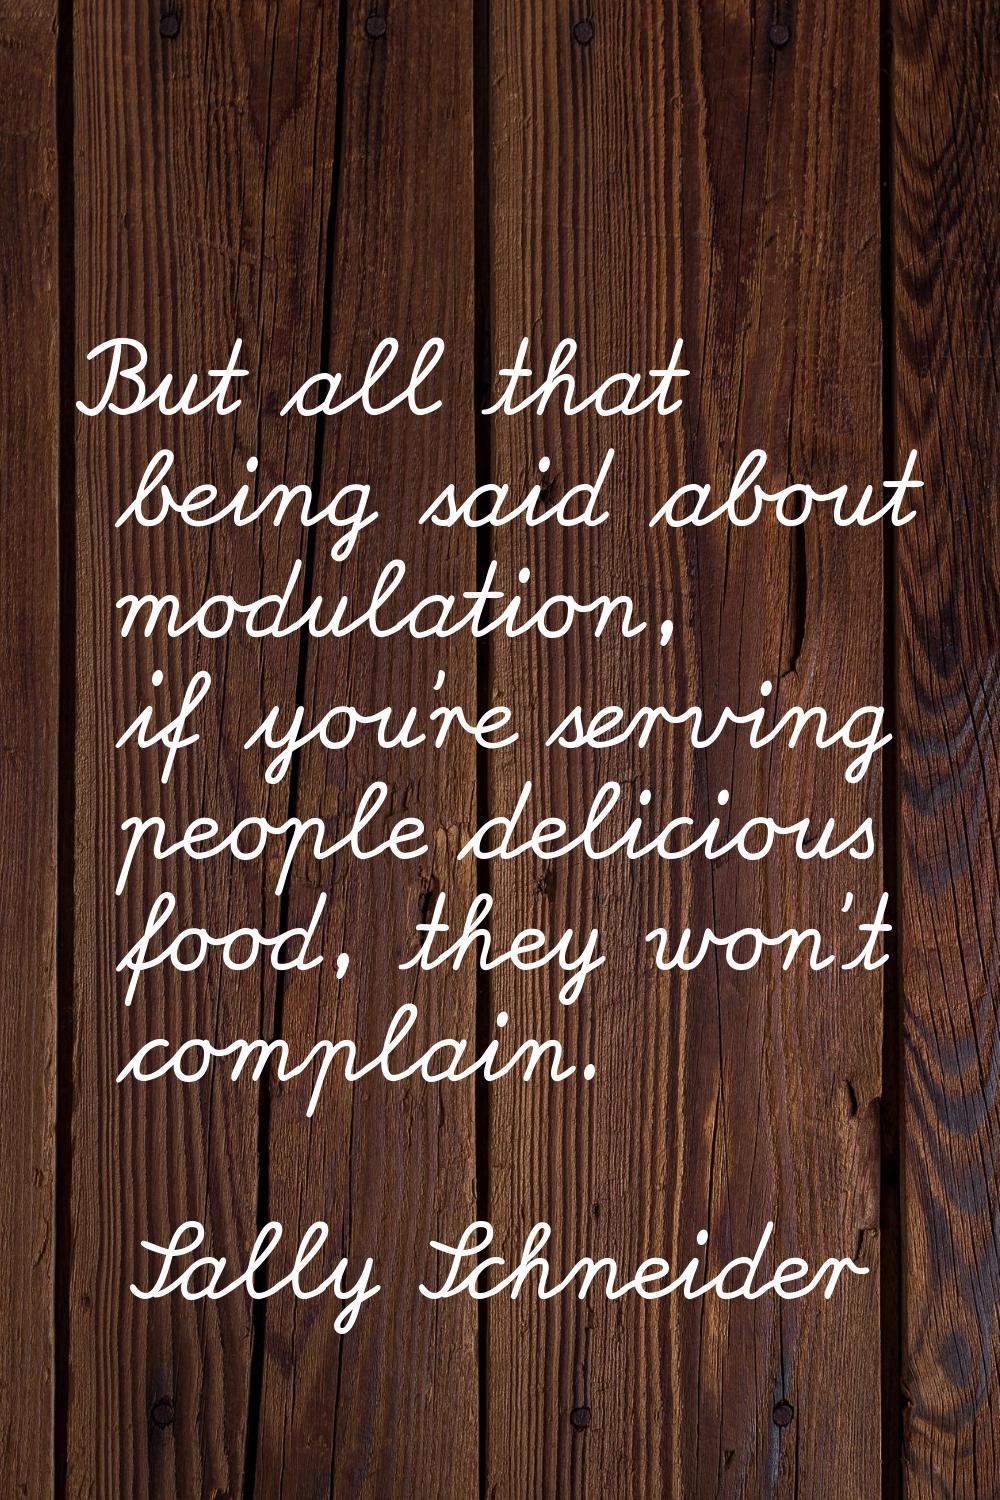 But all that being said about modulation, if you're serving people delicious food, they won't compl